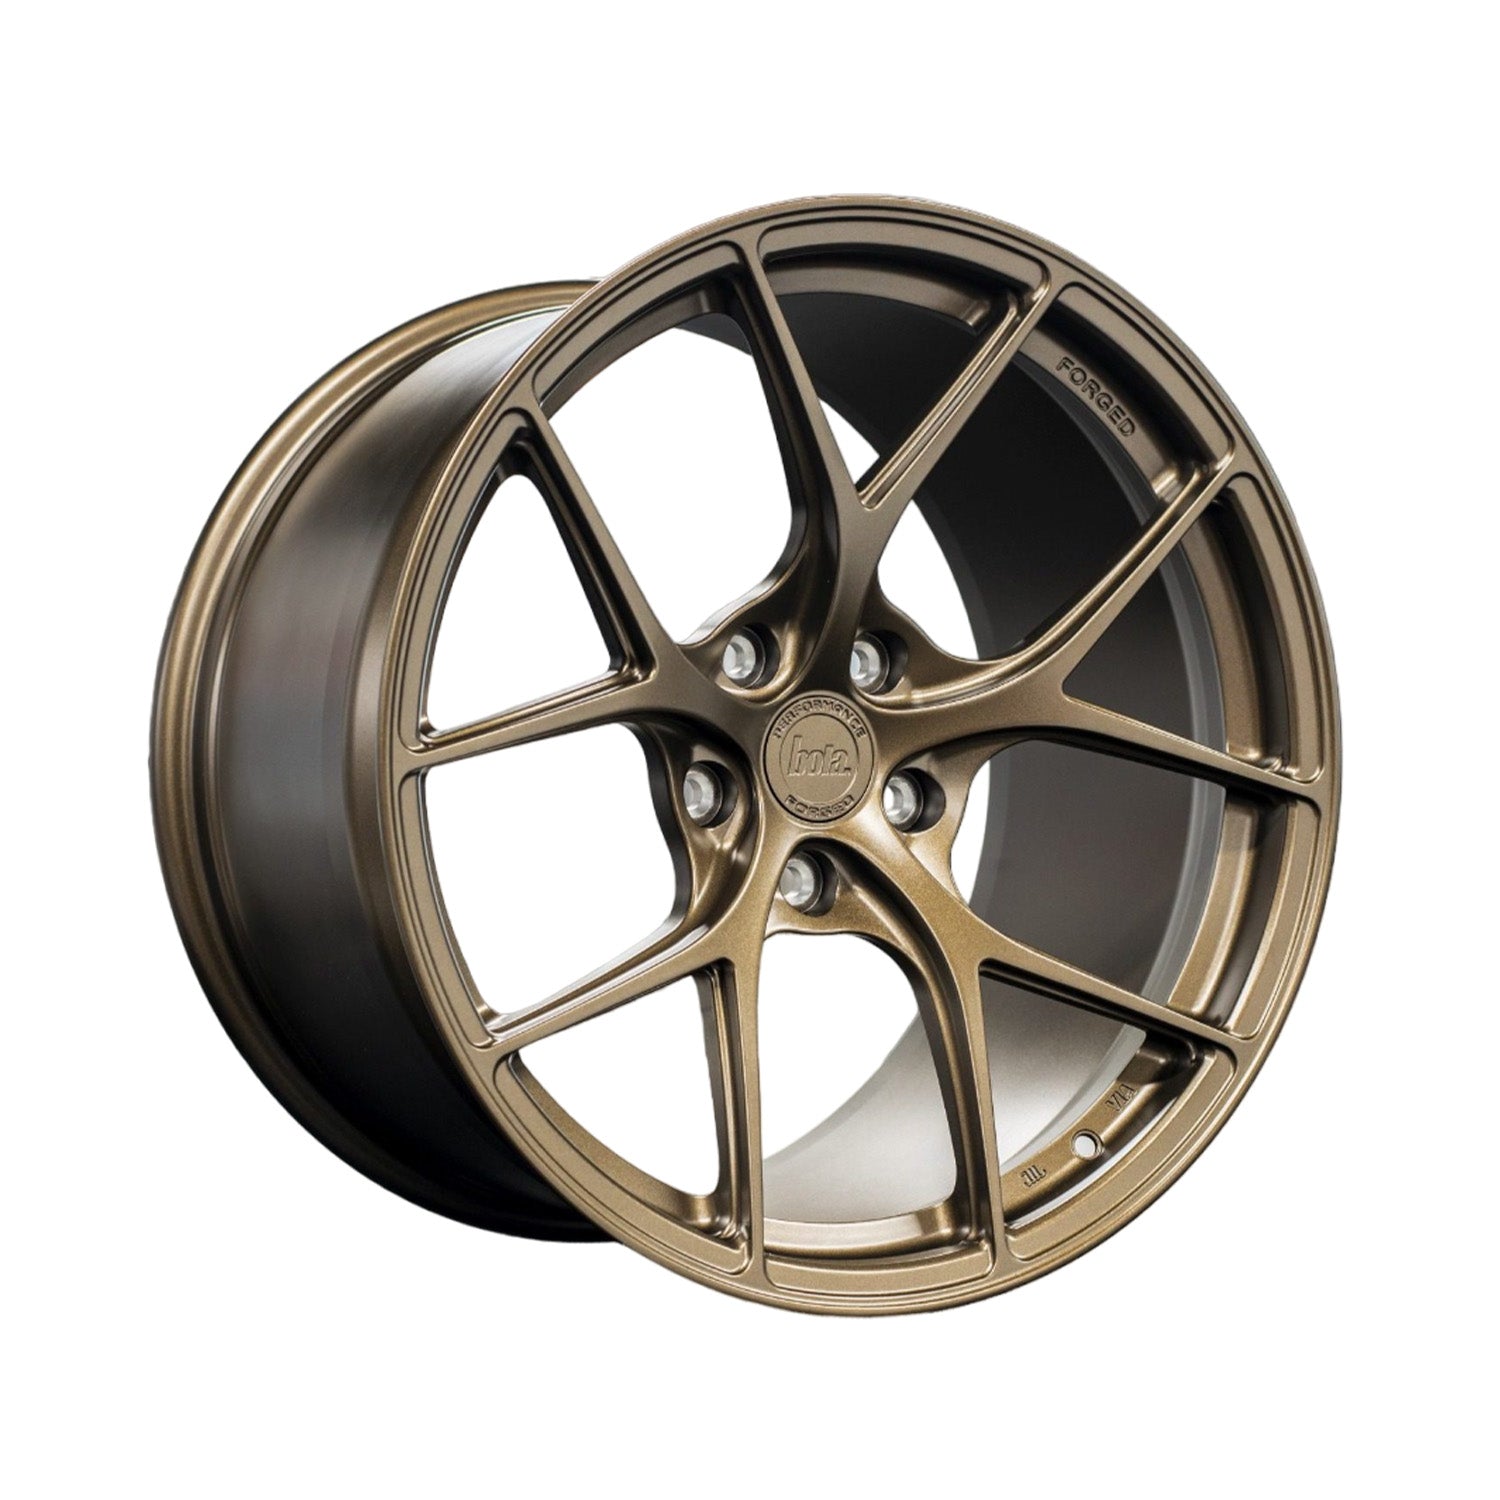 Bola FP2 19" Forged Alloy Wheels In Matte Bronze